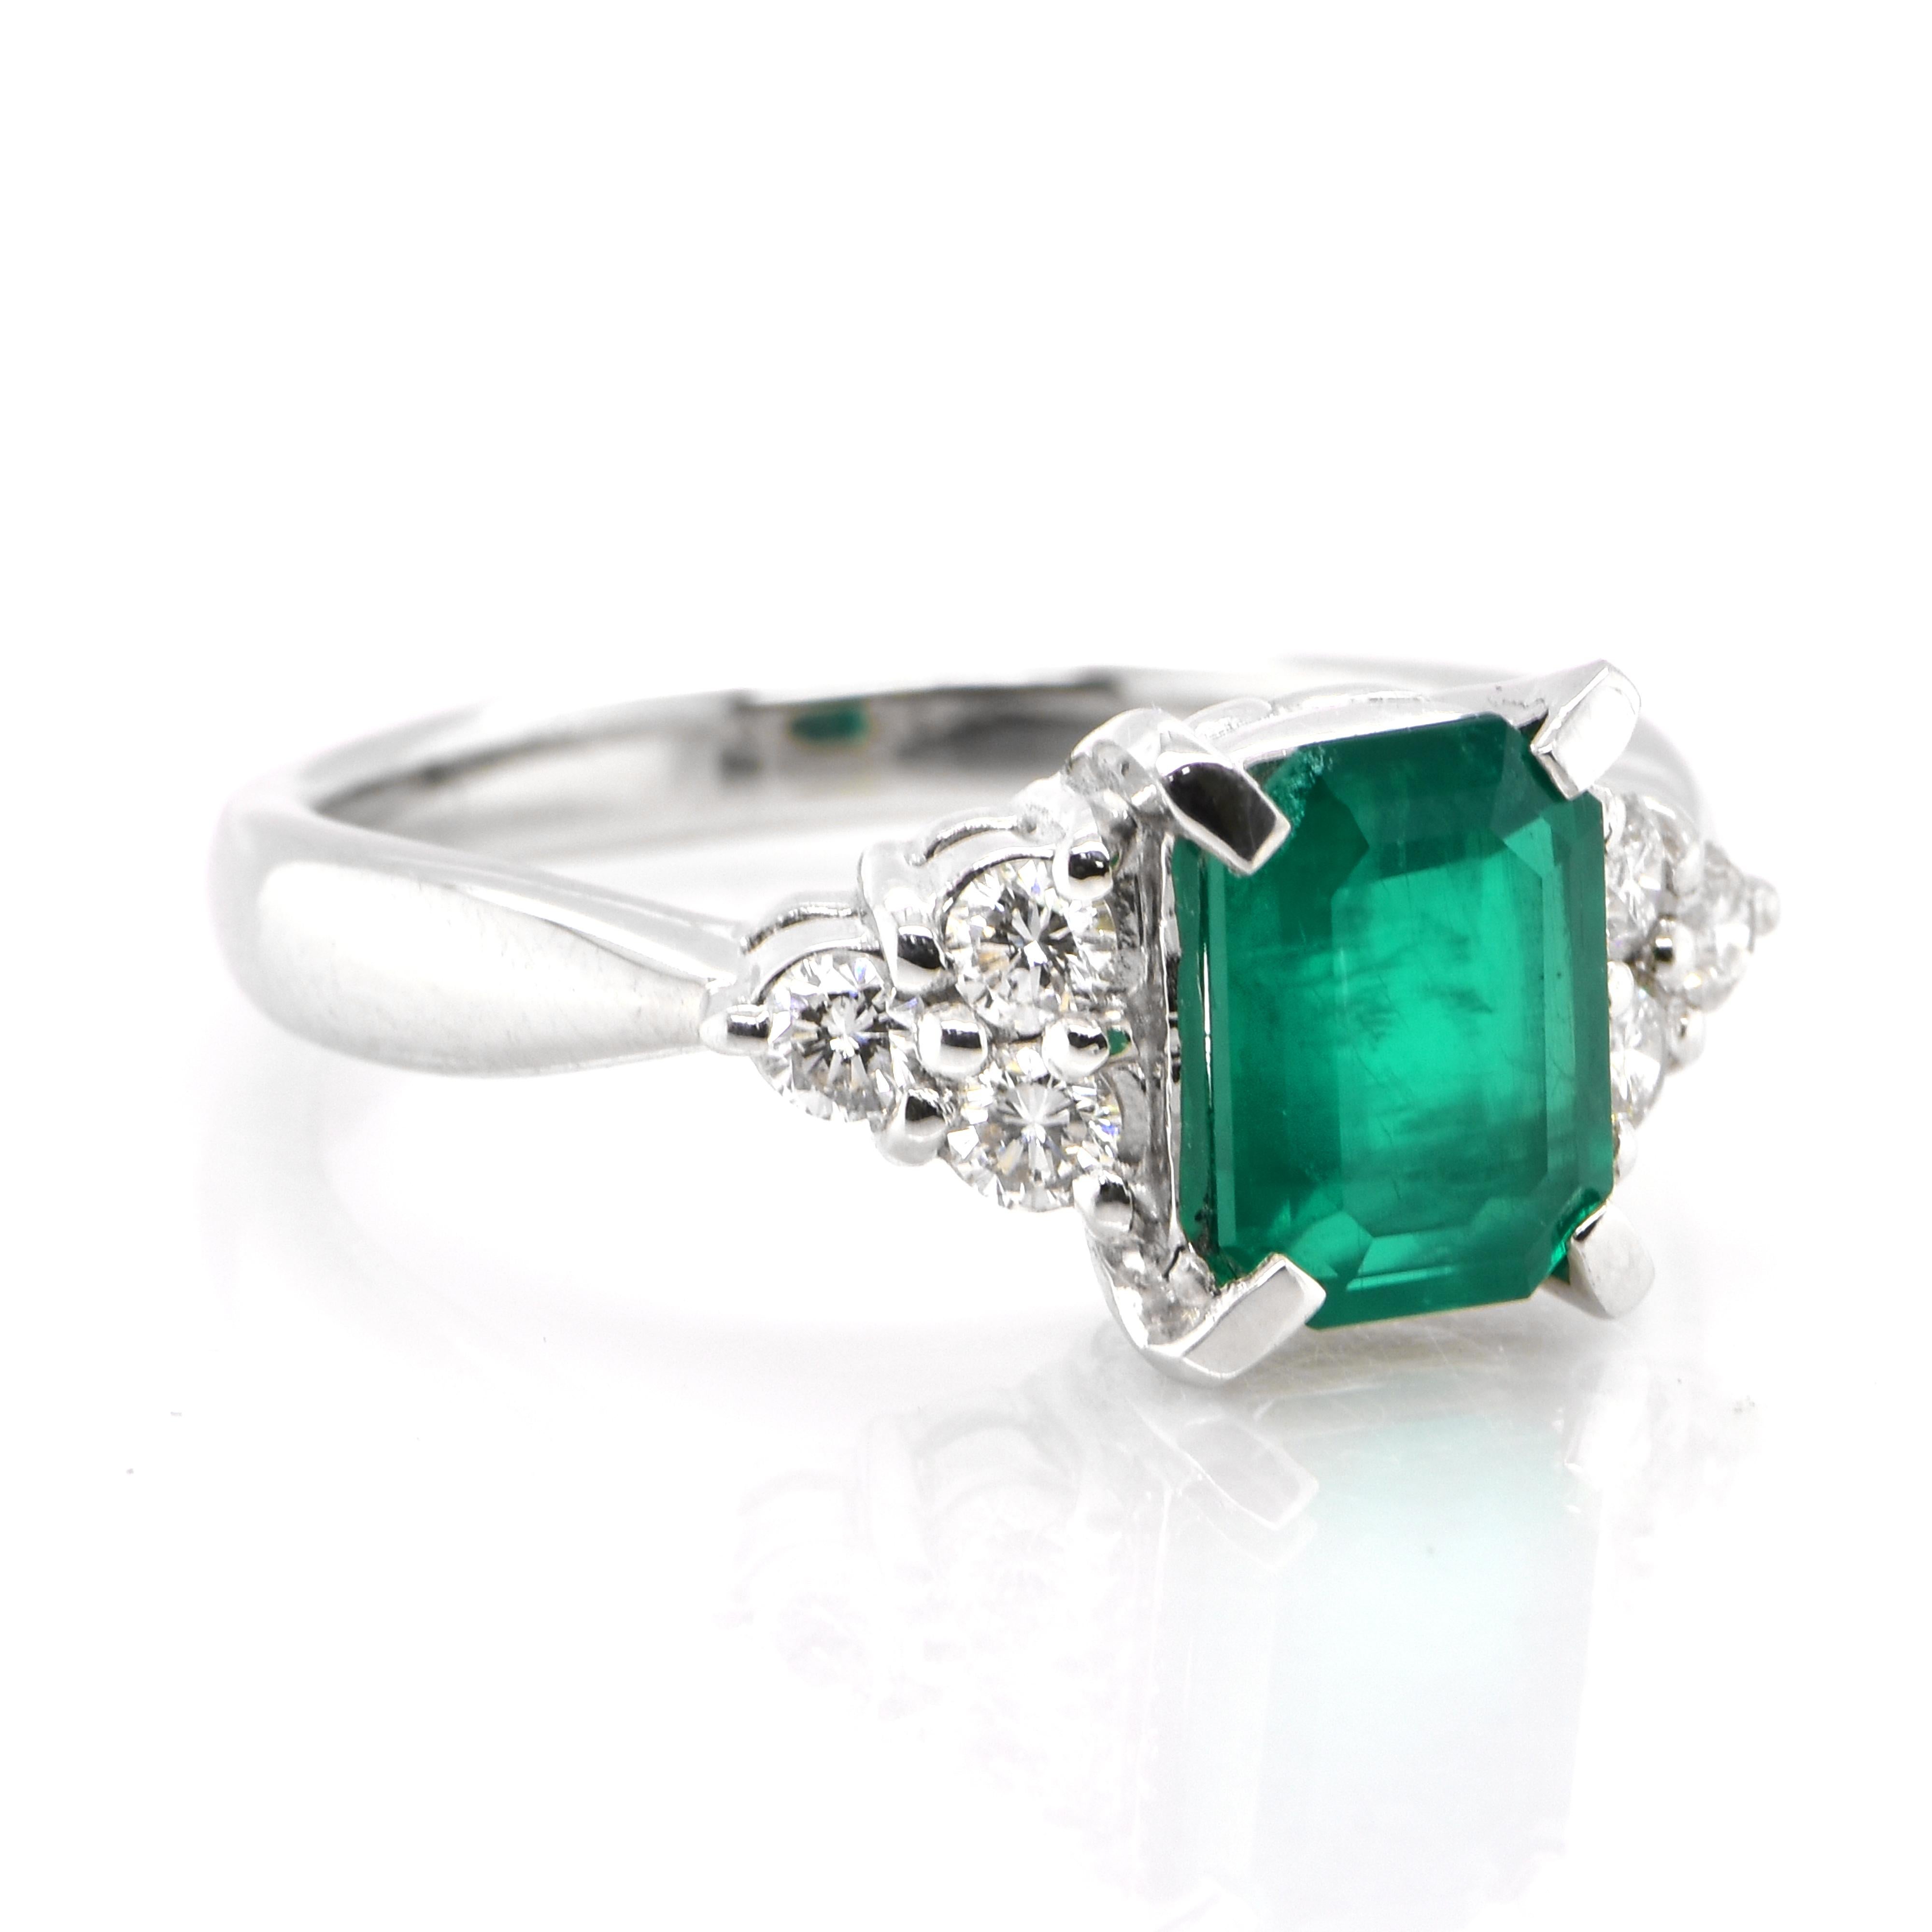 Modern 1.29 Carat Natural Emerald and Diamond Ring Made in Platinum